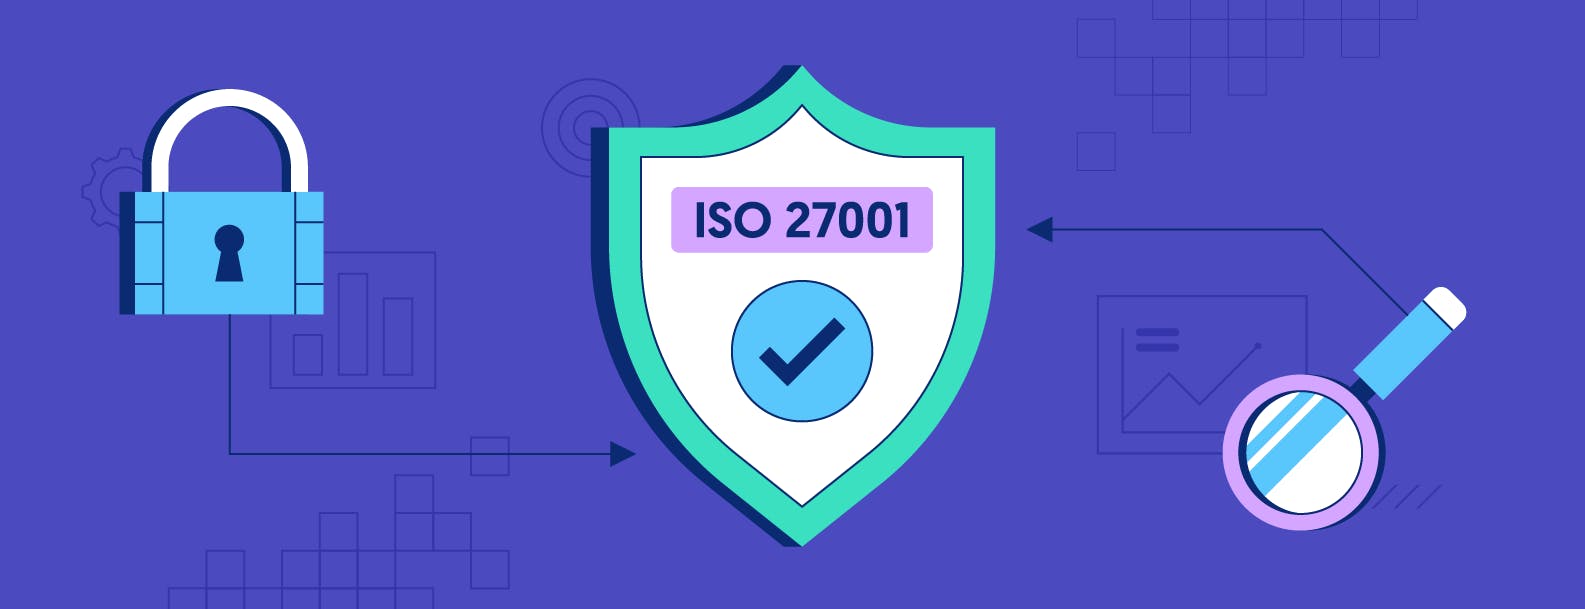 5 Steps to a Successful ISO 27001 Audit + Checklist